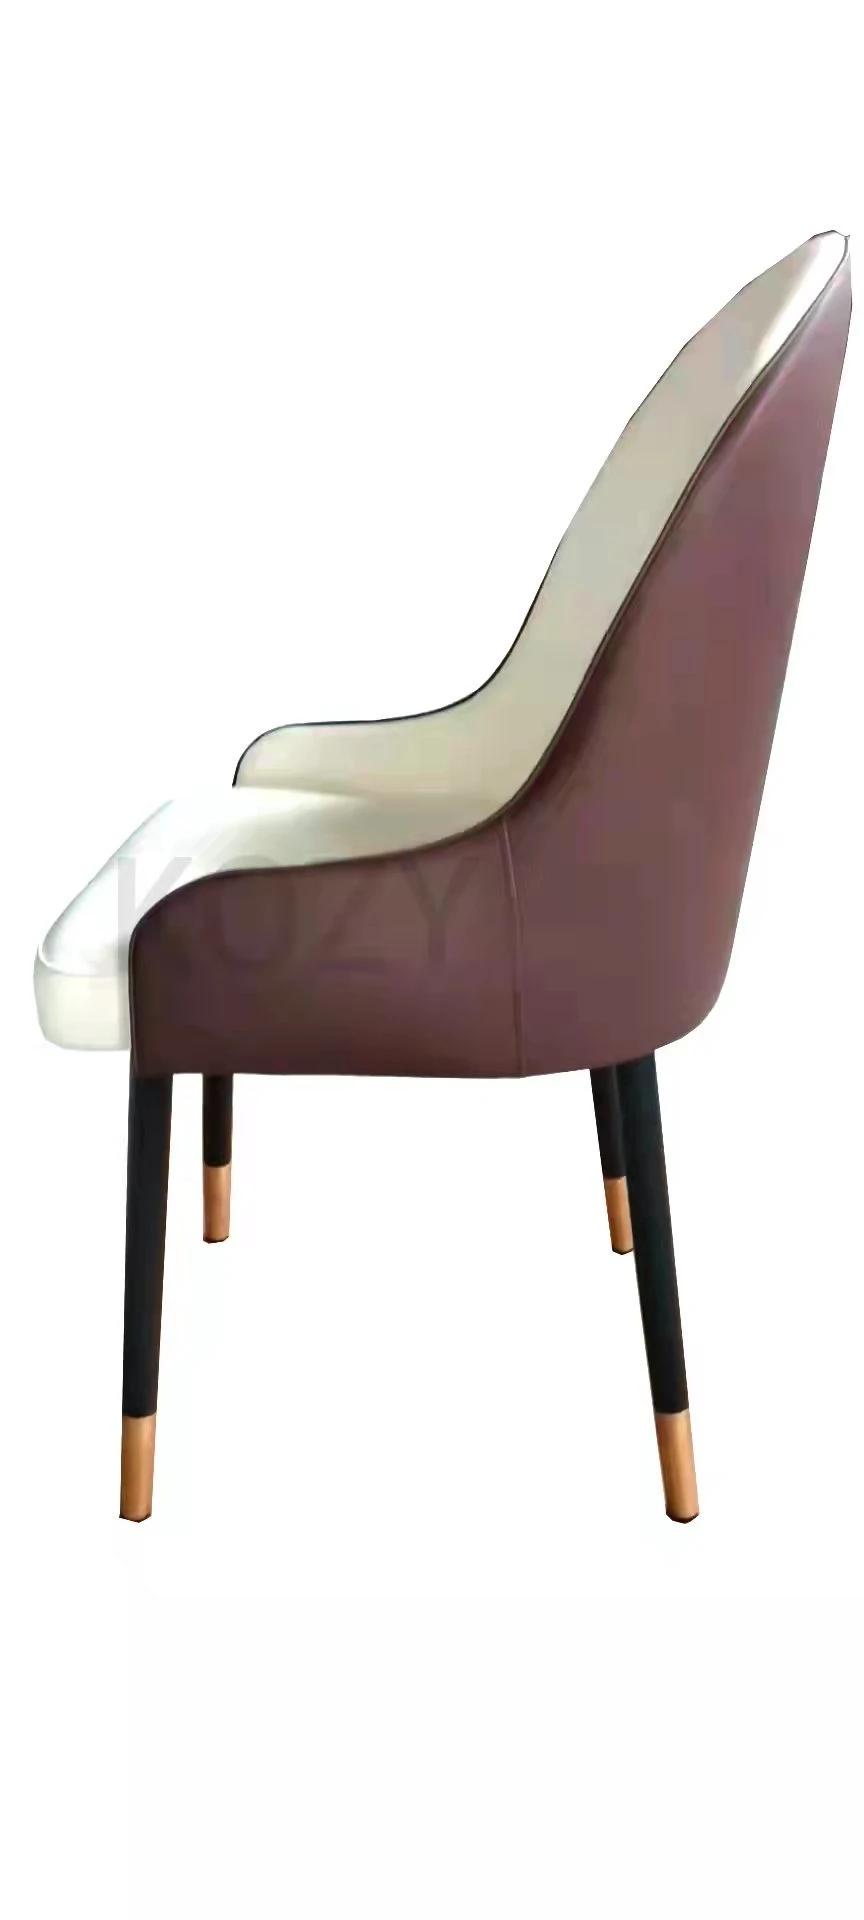 Home Furniture General Use Low Price Modern Leather Chairs